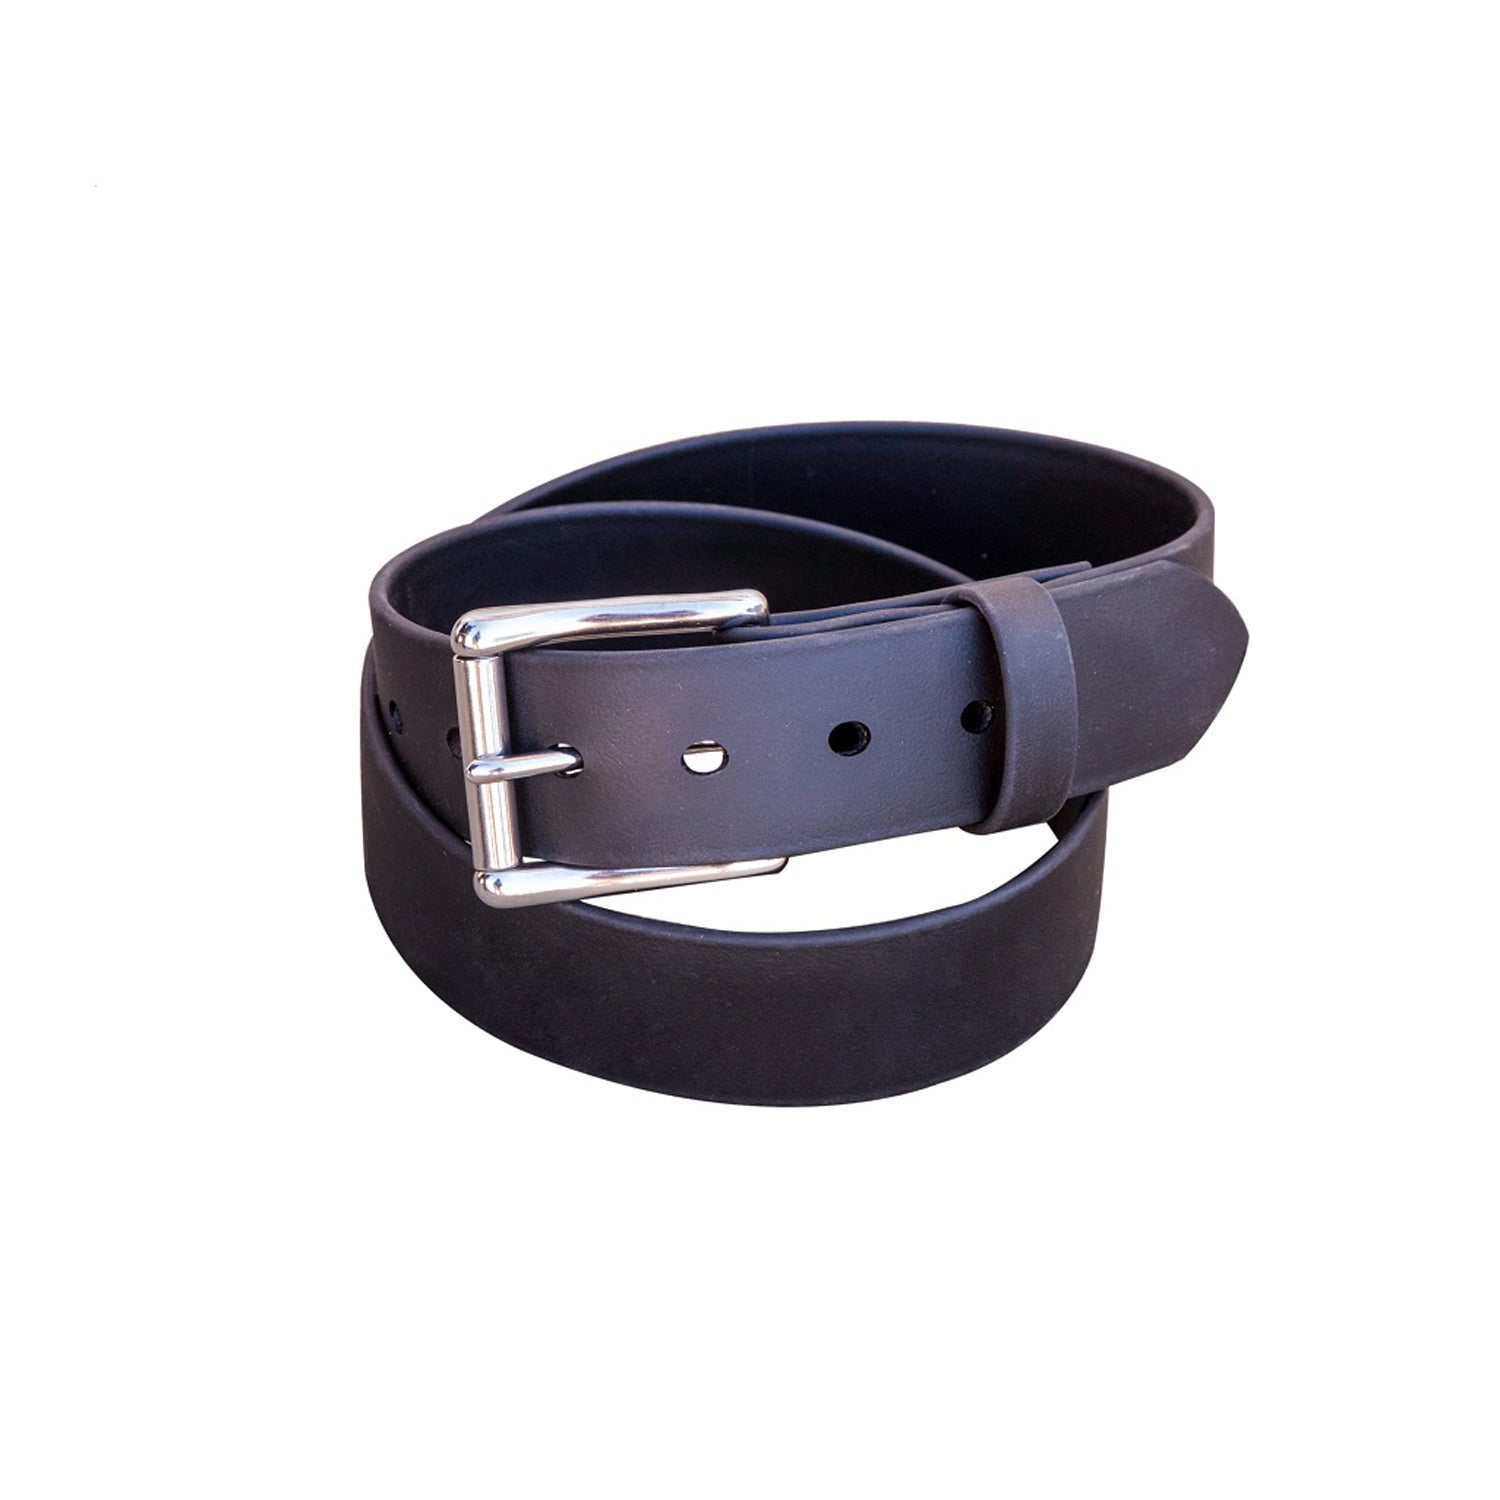 Made in USA 1.5 inch Black Genuine Leather Belt | Titanium Buckle 40 inch / Black / Titanium/Leather